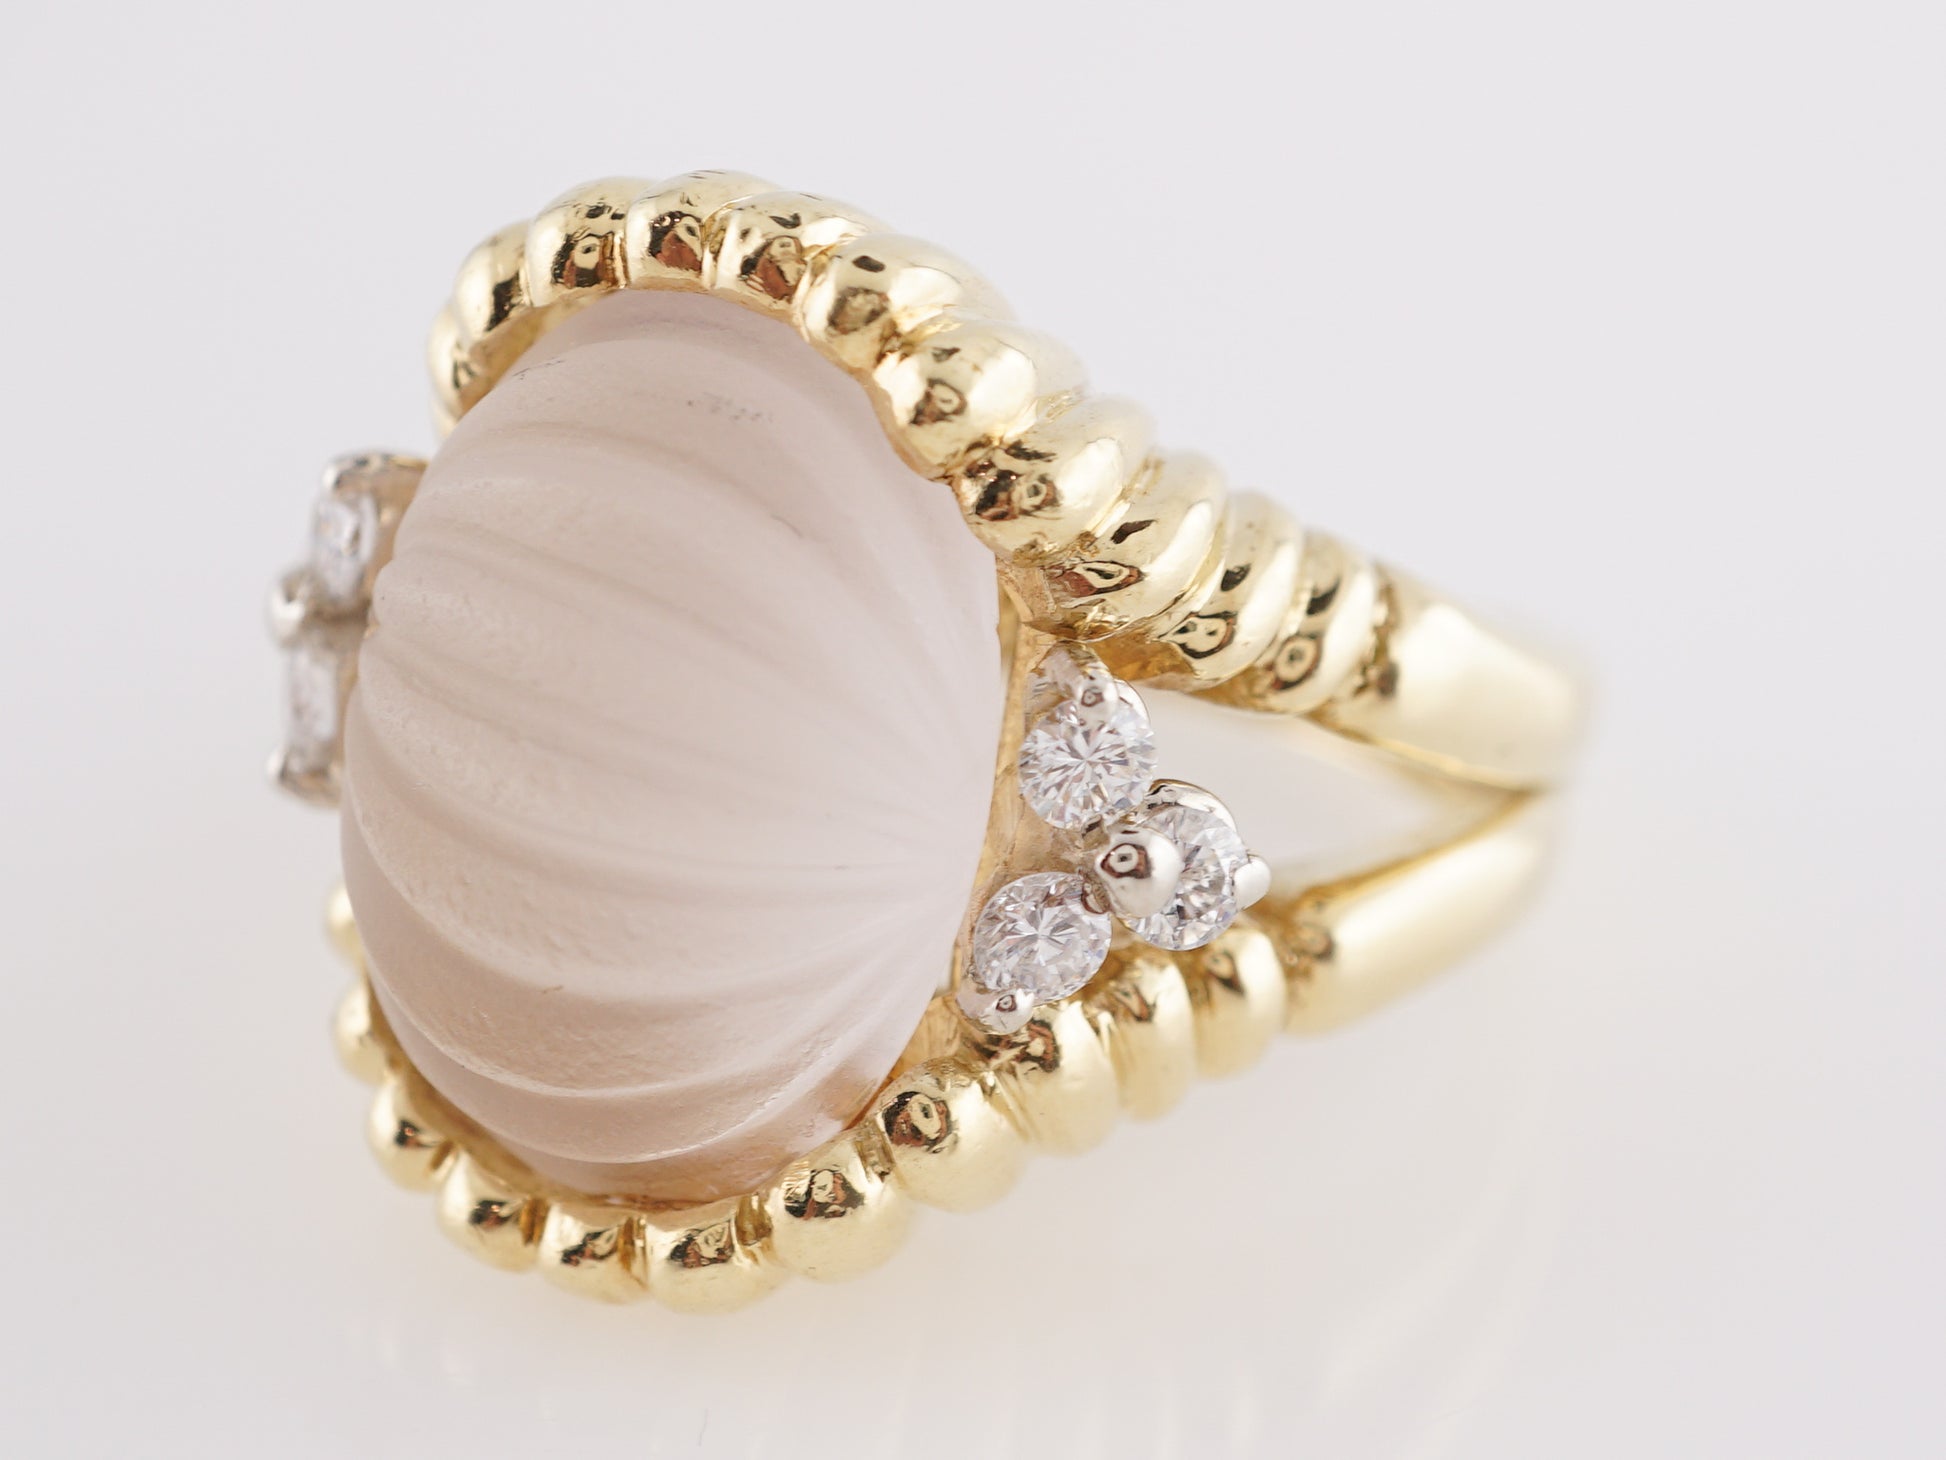 Frosted Quartz Cocktail Ring with Diamond Accents in 18kComposition: 18 Karat Yellow Gold Ring Size: 5.75 Total Diamond Weight: .36ct Total Gram Weight: 13.8 g Inscription: 18K
      